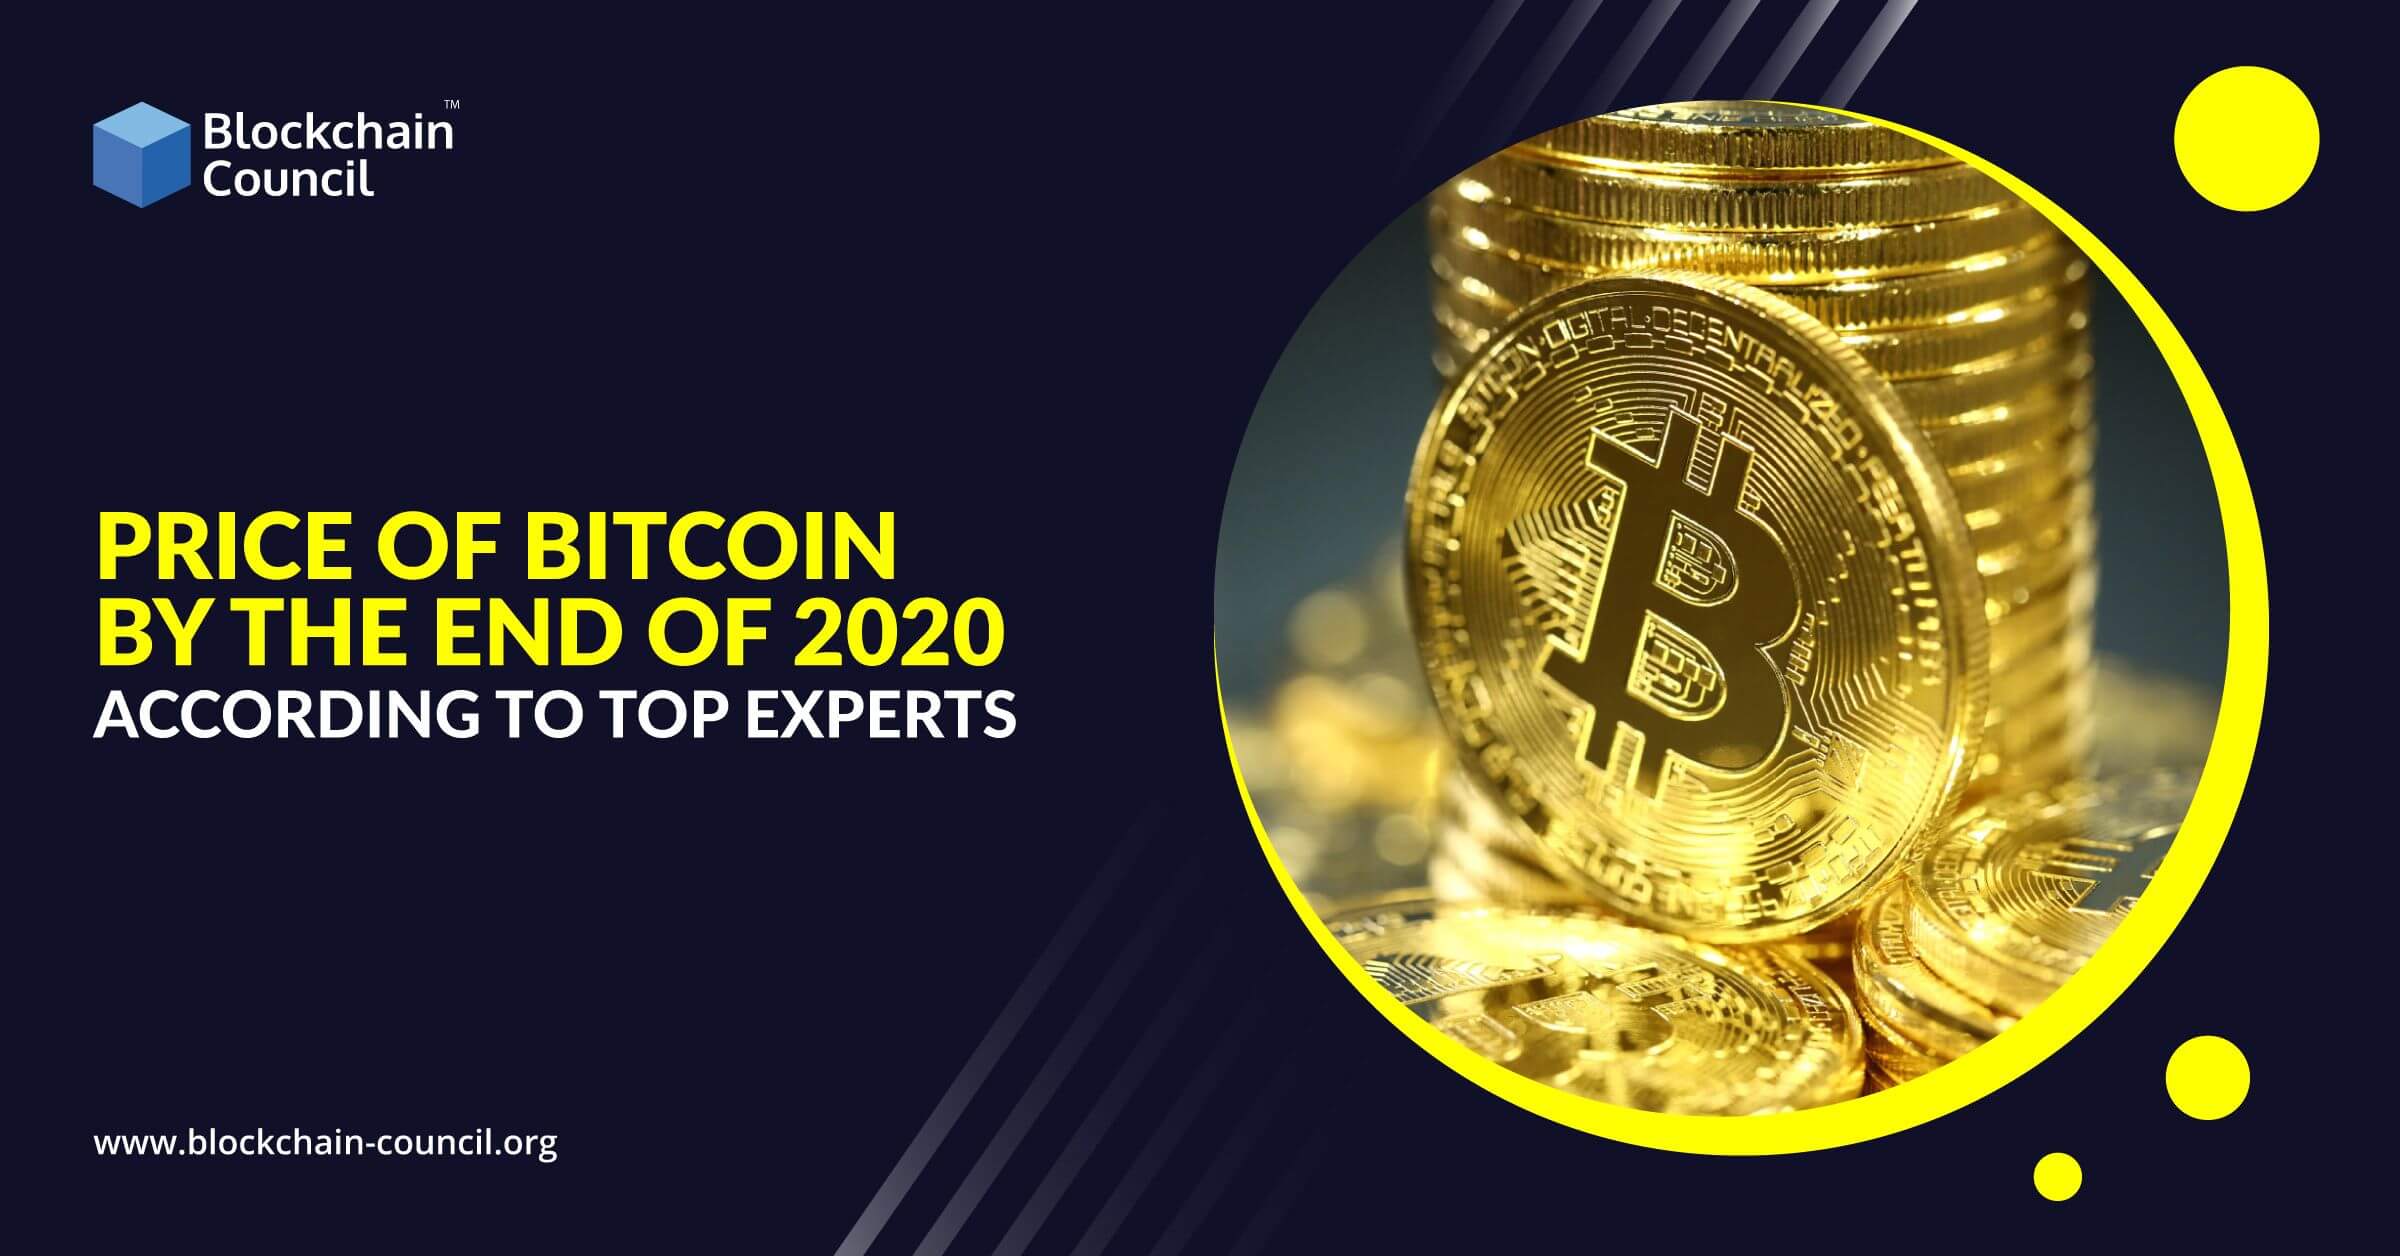 Price-of-Bitcoin-by-the-end-of-2020-According-to-Top-Experts